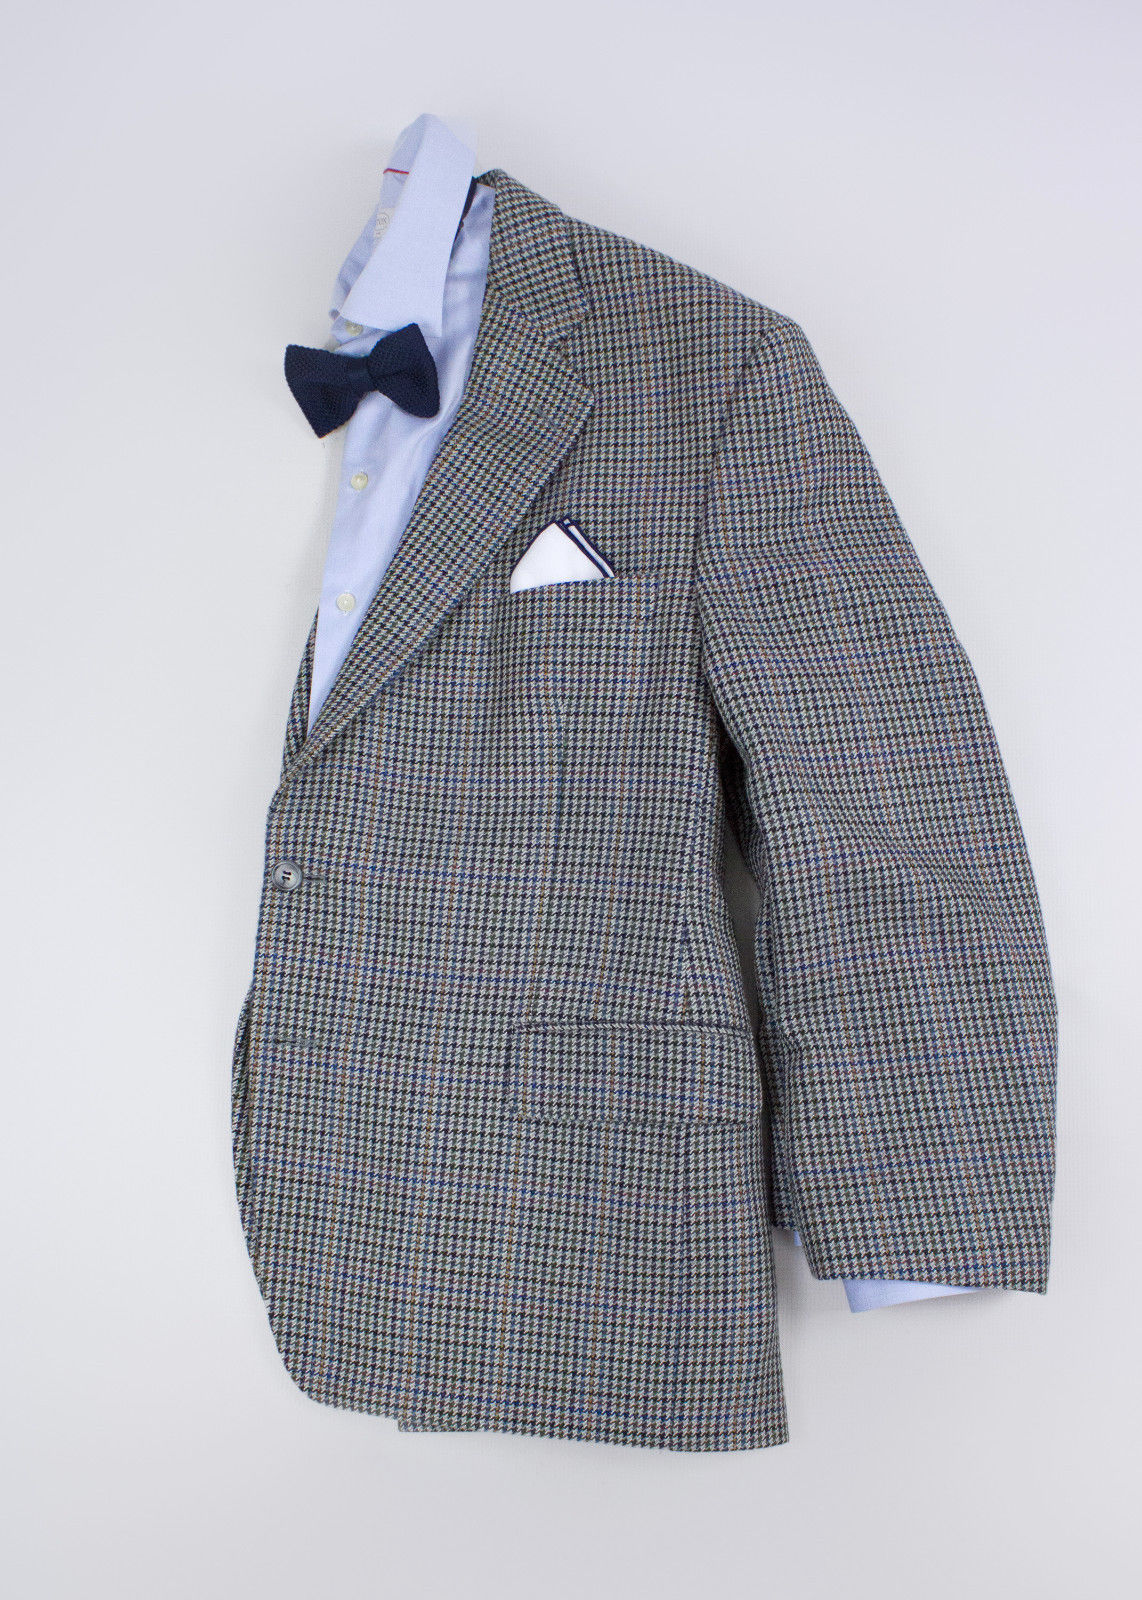 MAGEE Wool Houndstooth Plaid Blazer, US 48 R, EU 58 R - secondfirst